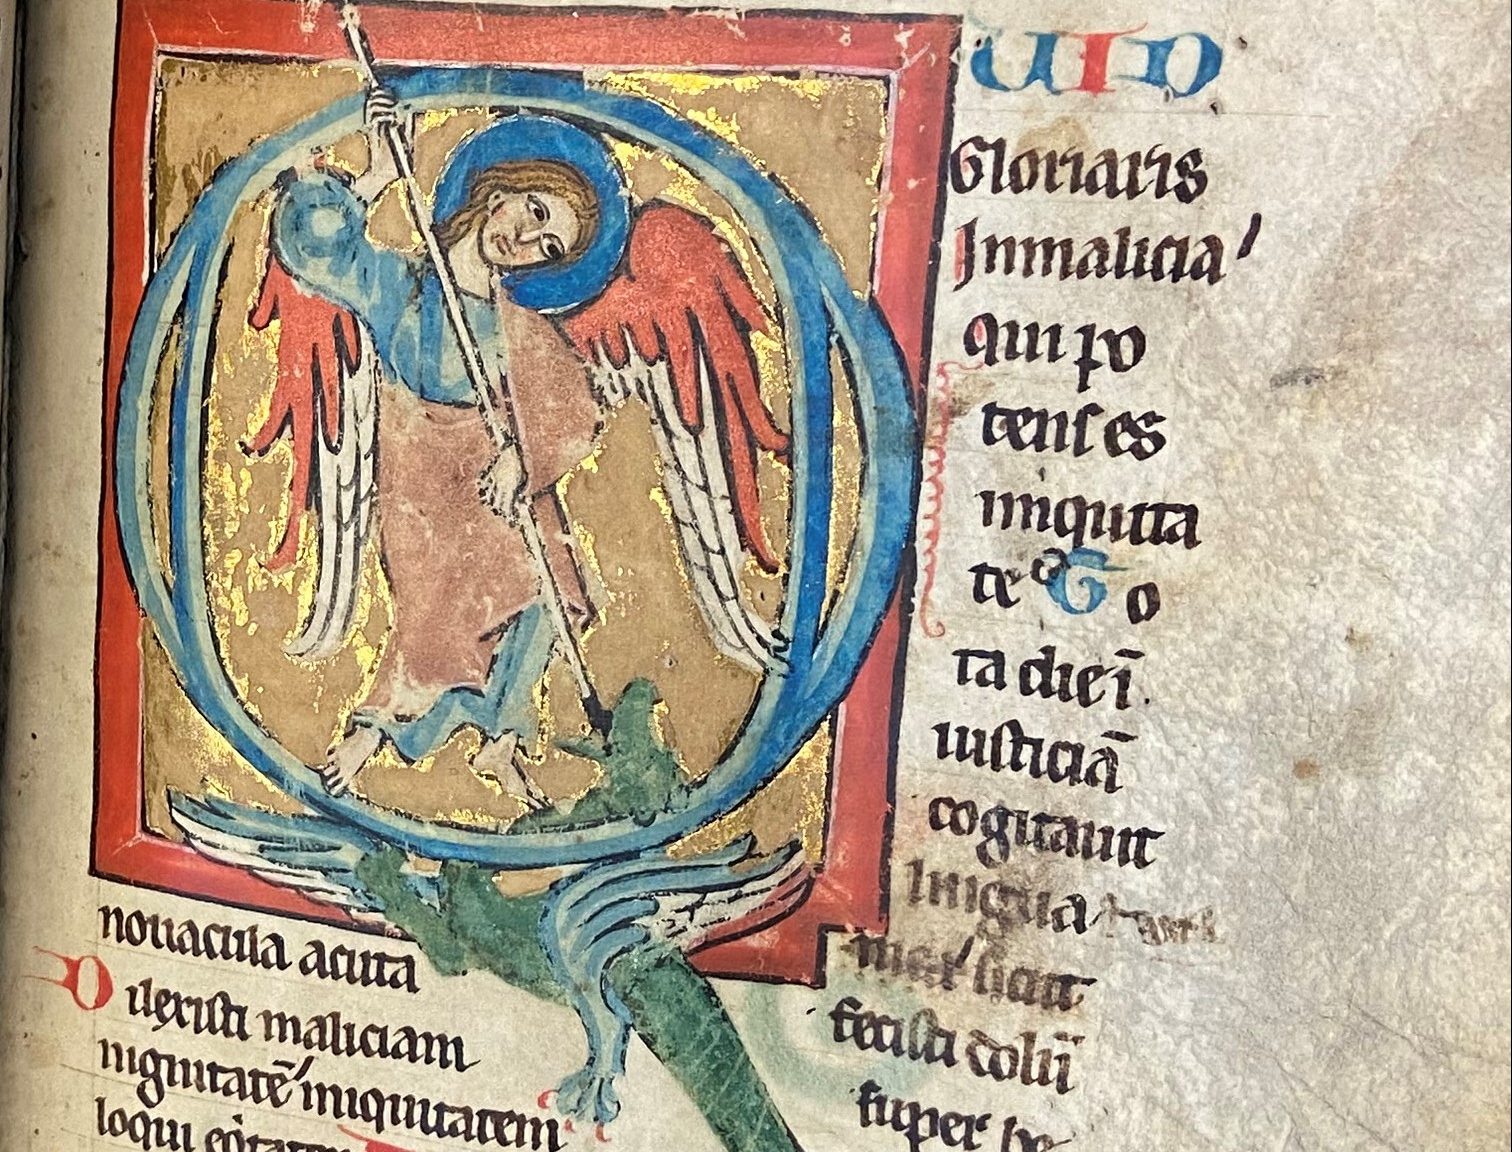 A parchment page with lines of Psalm verses in Latin gothic script and a large, historiated 'Q' initial featuring St. Michael slaying a dragon in the top right corner.